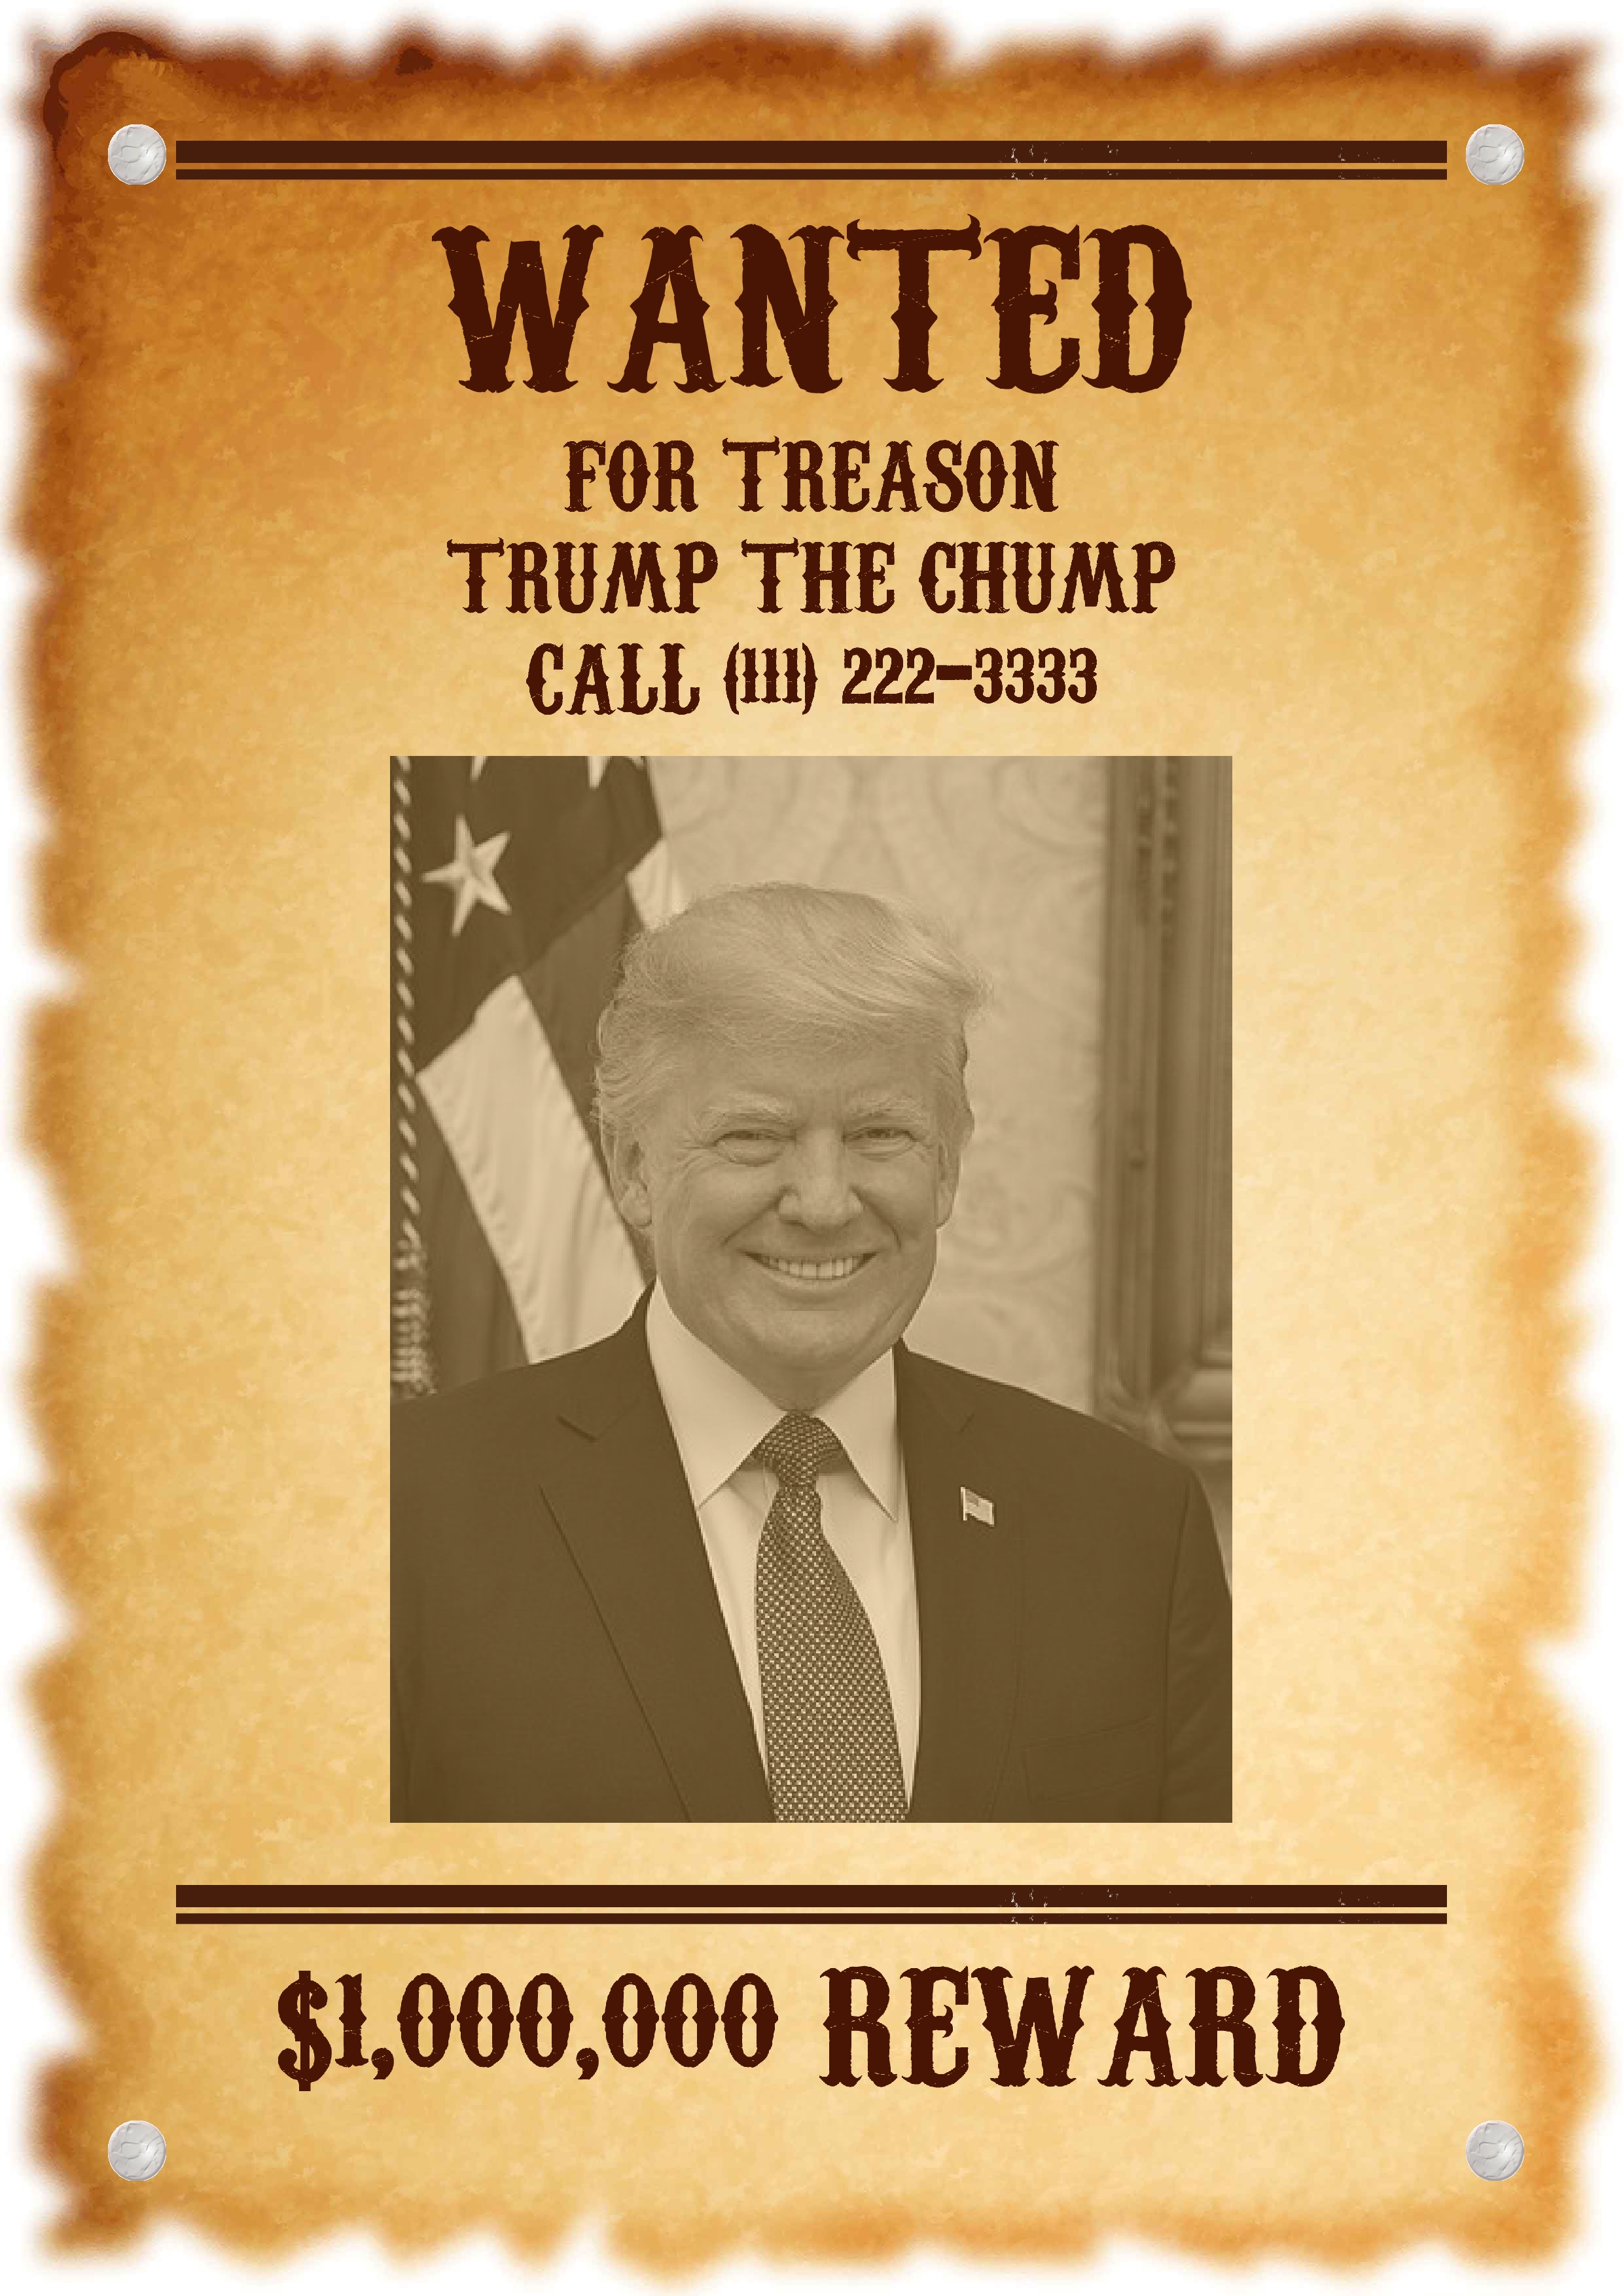 Wanted poster...